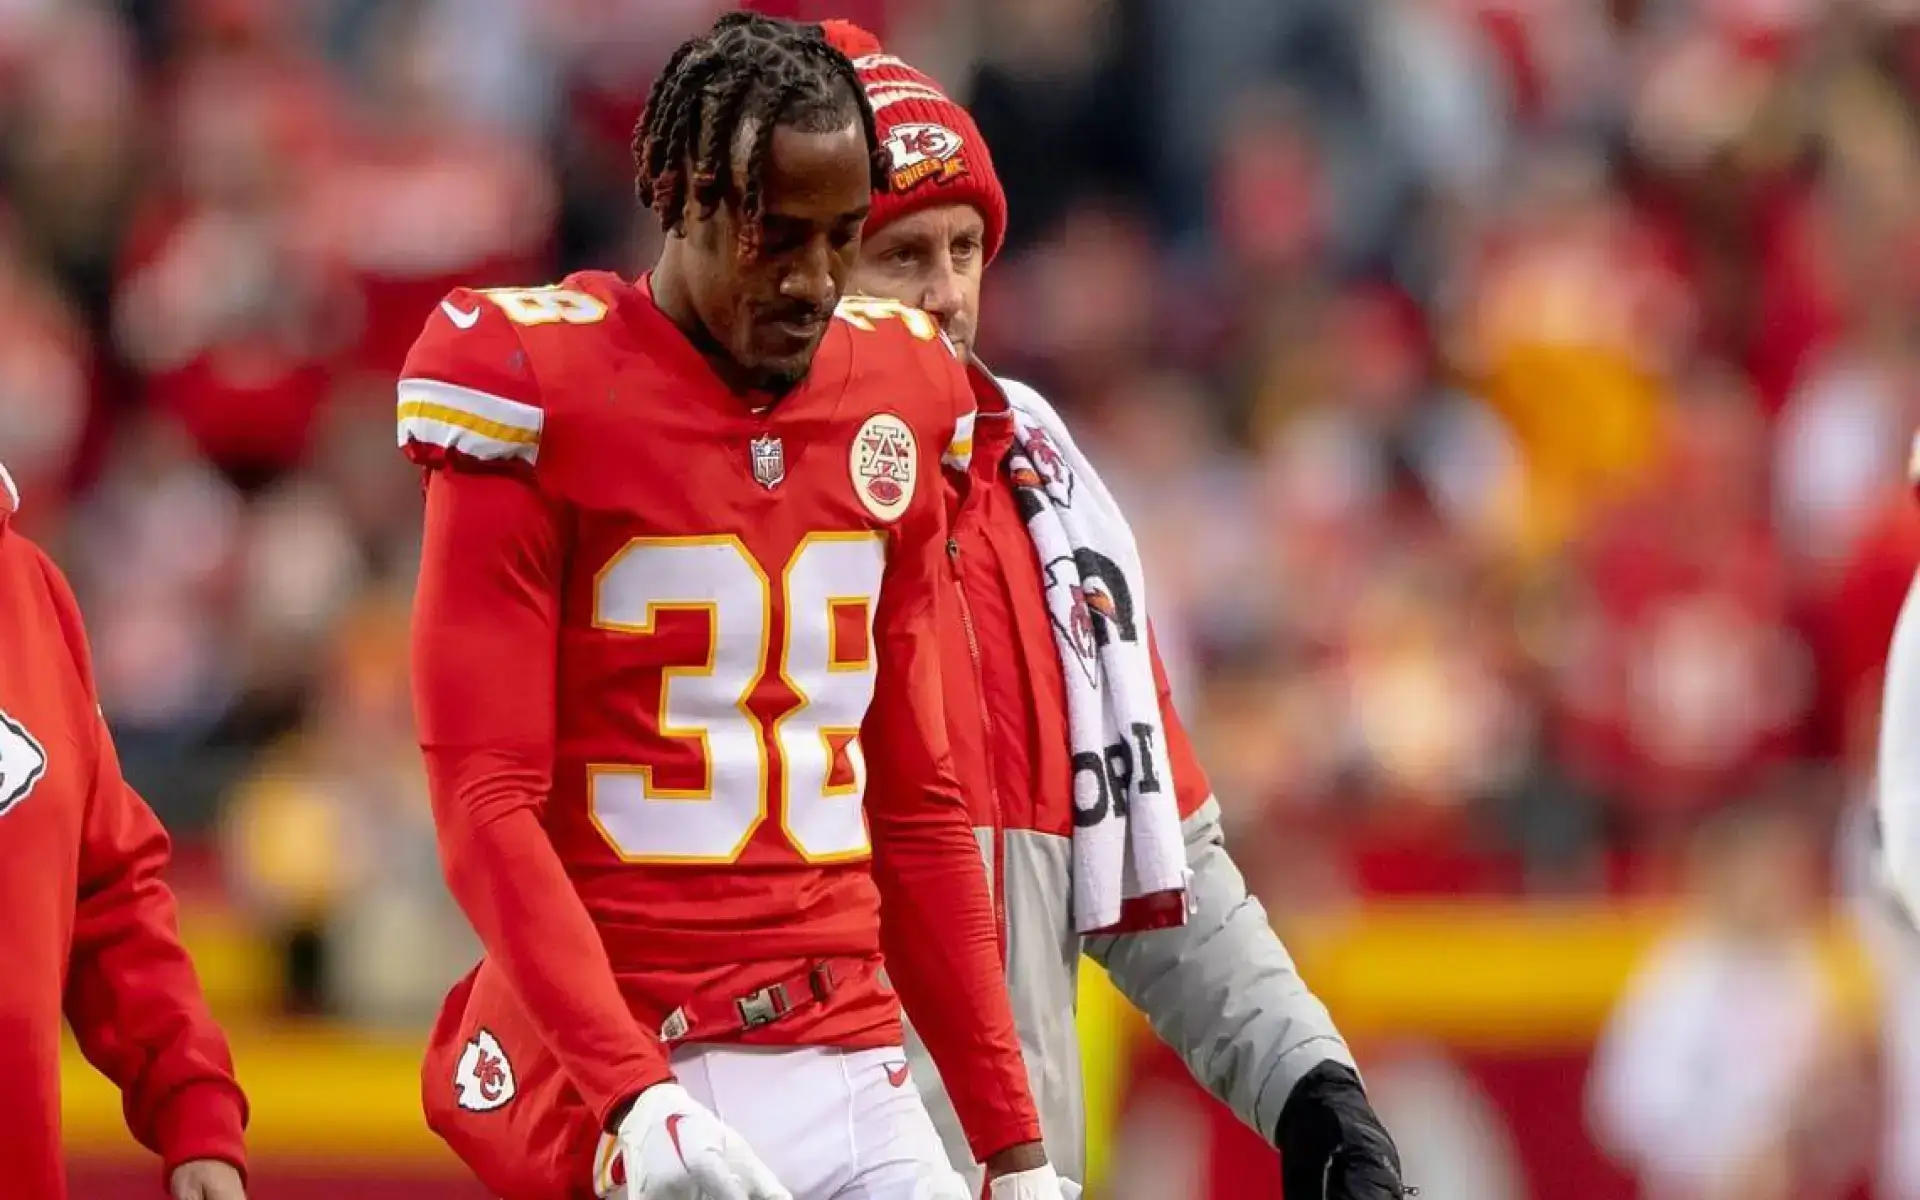 Chiefs trade L’Jarius Sneed to Titans in NFL blowout